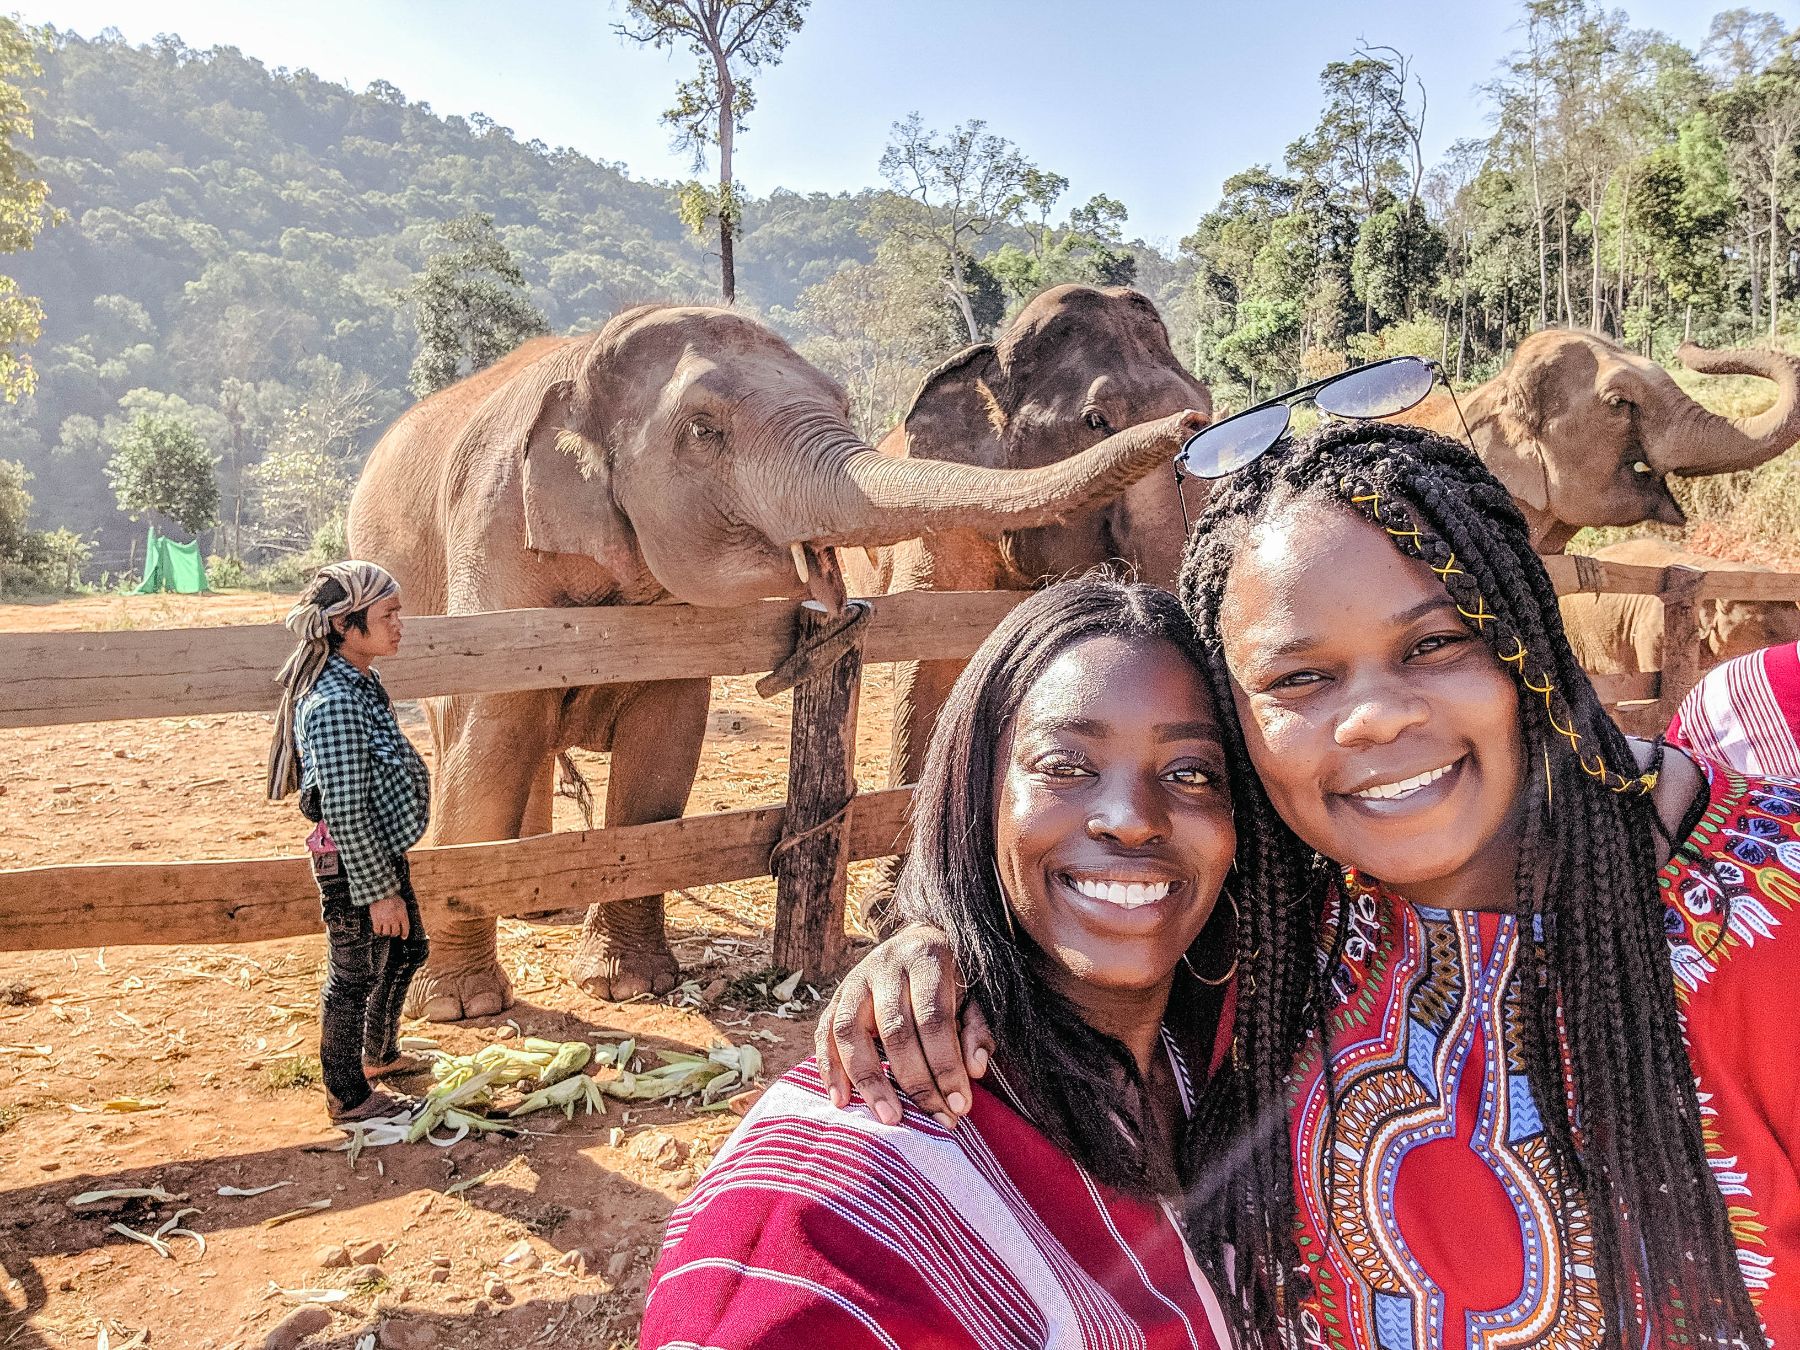 Snapping pics in front of the elephants at the jungle elephant sanctuary